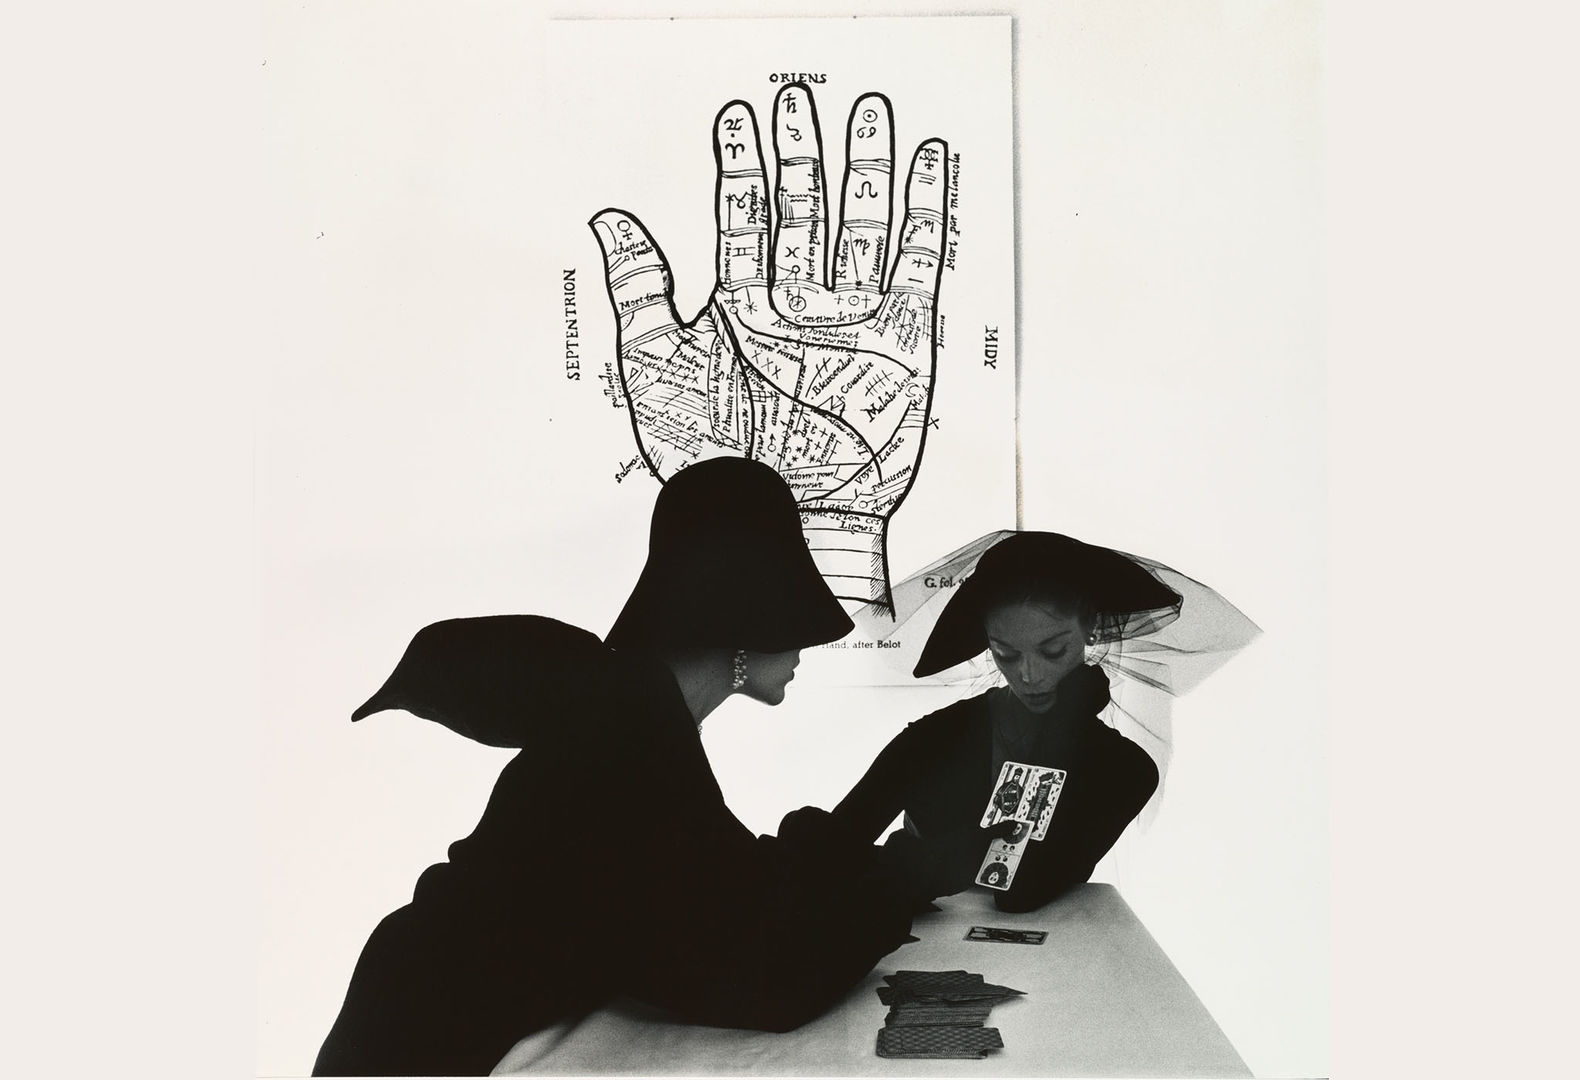 Irving Penn's "The Tarot Reader (Bridget Tichenor and Jean Patchett), New York" with two women in stylist black clothing reading tarot cards with a diagram of a hand behind them